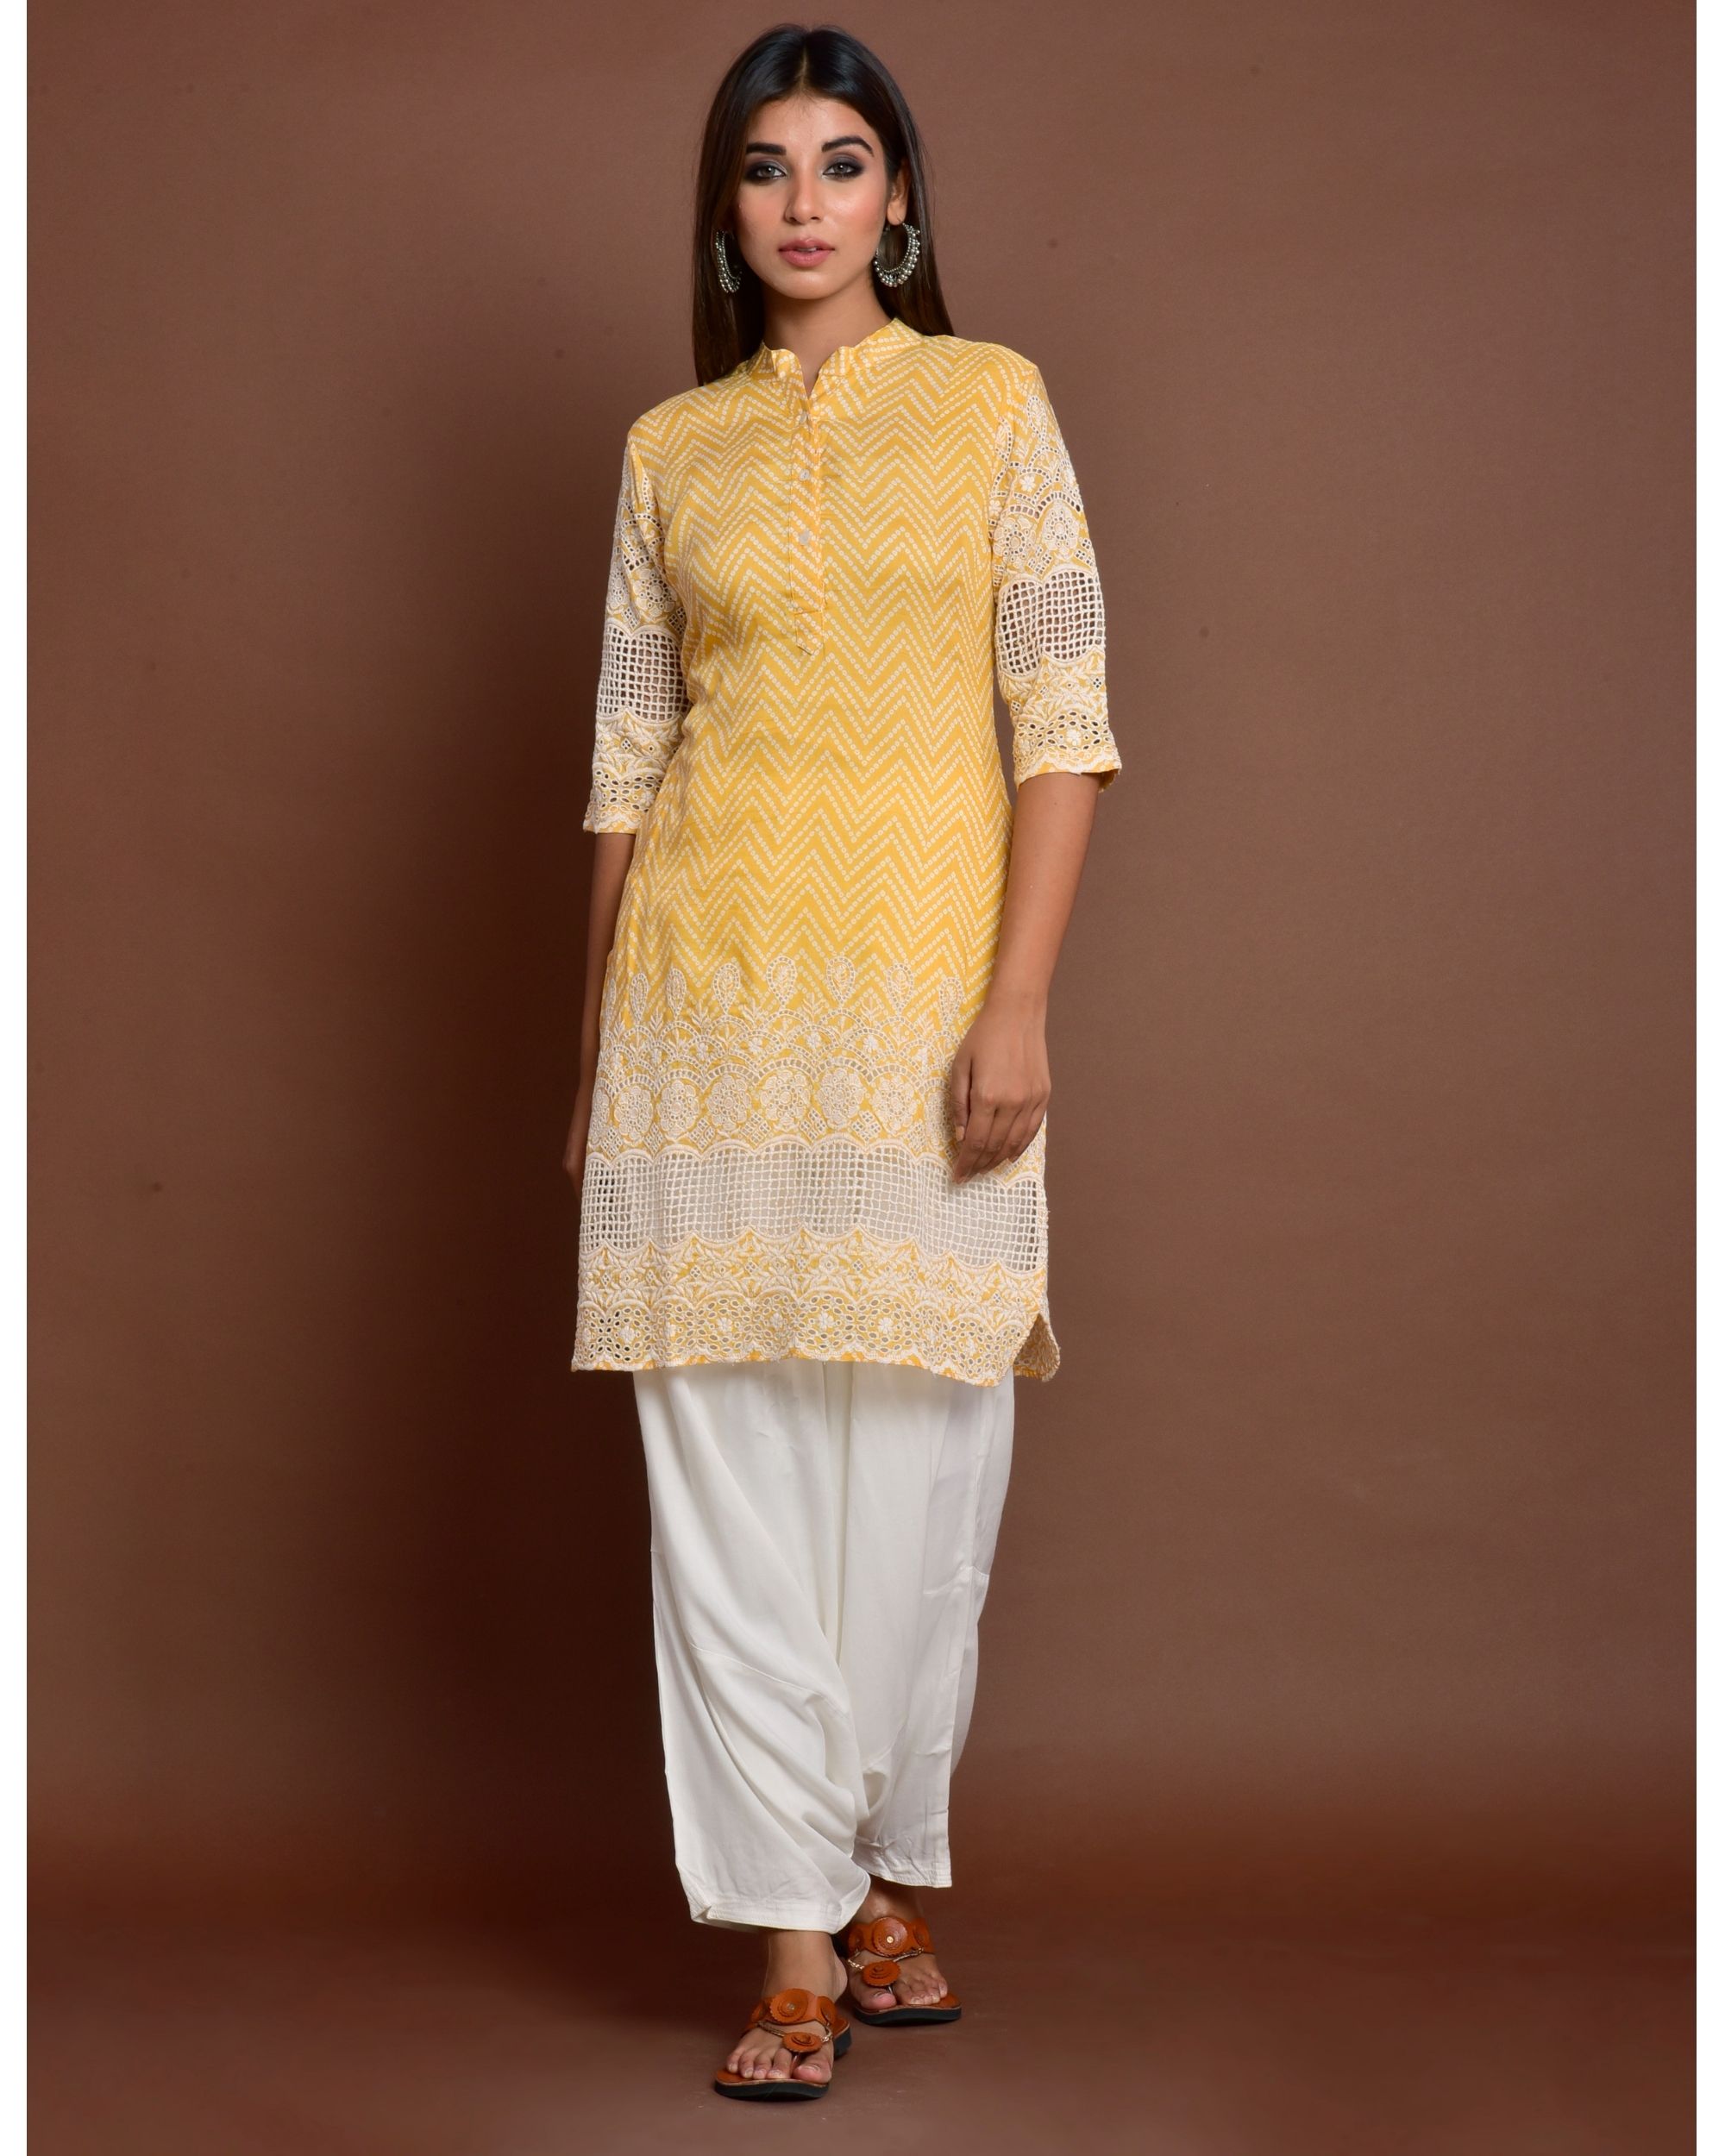 Yellow cutwork embroidered short kurta with off white patiala salwar - set of two